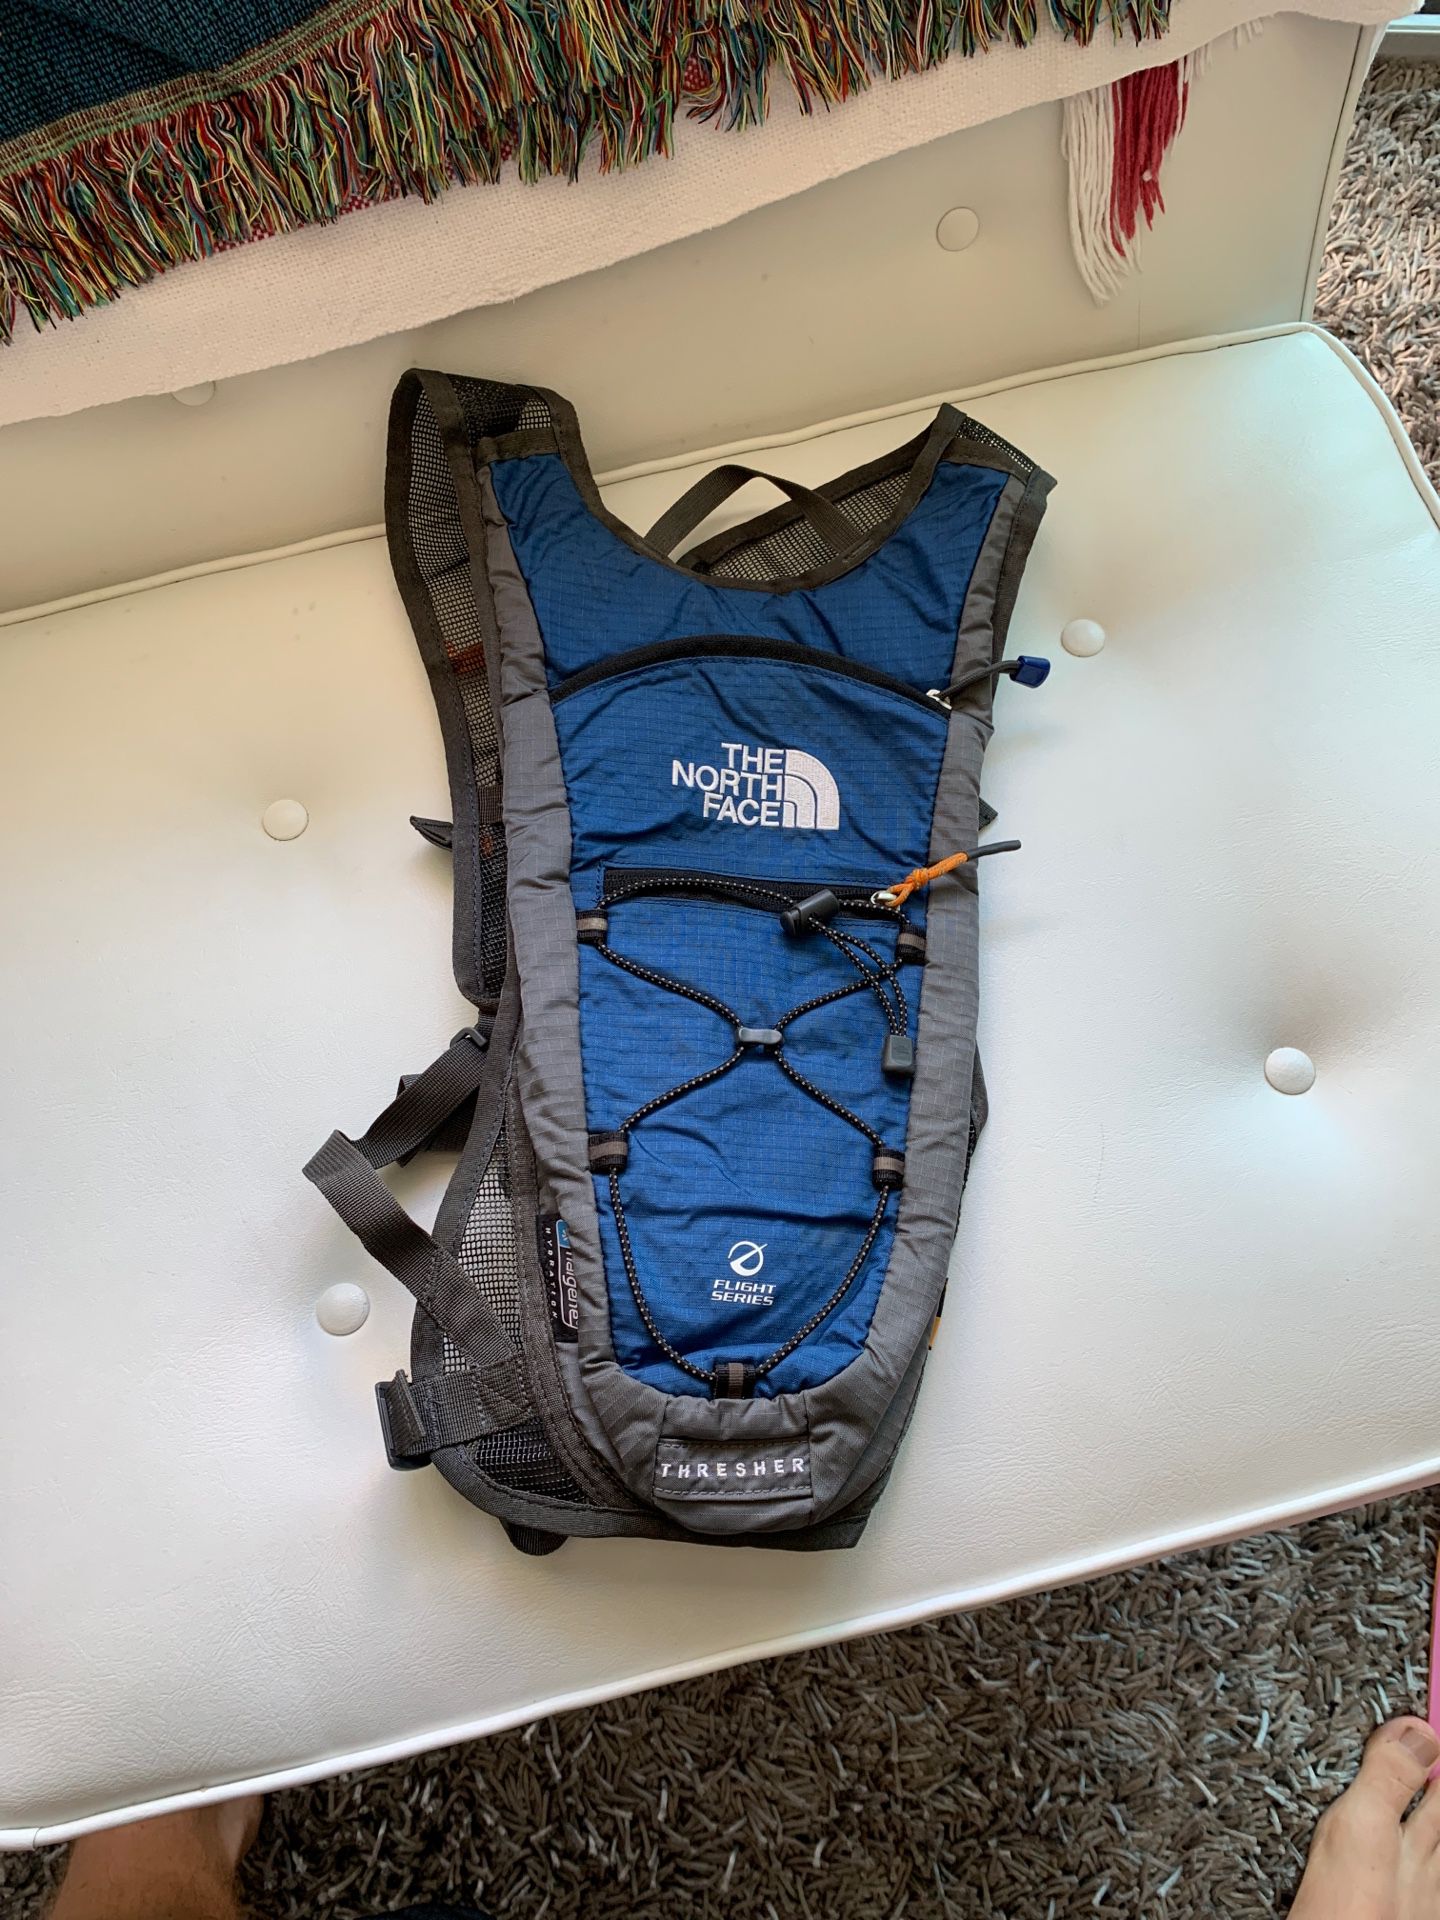 The North Face Flight Series Thresher Backpack